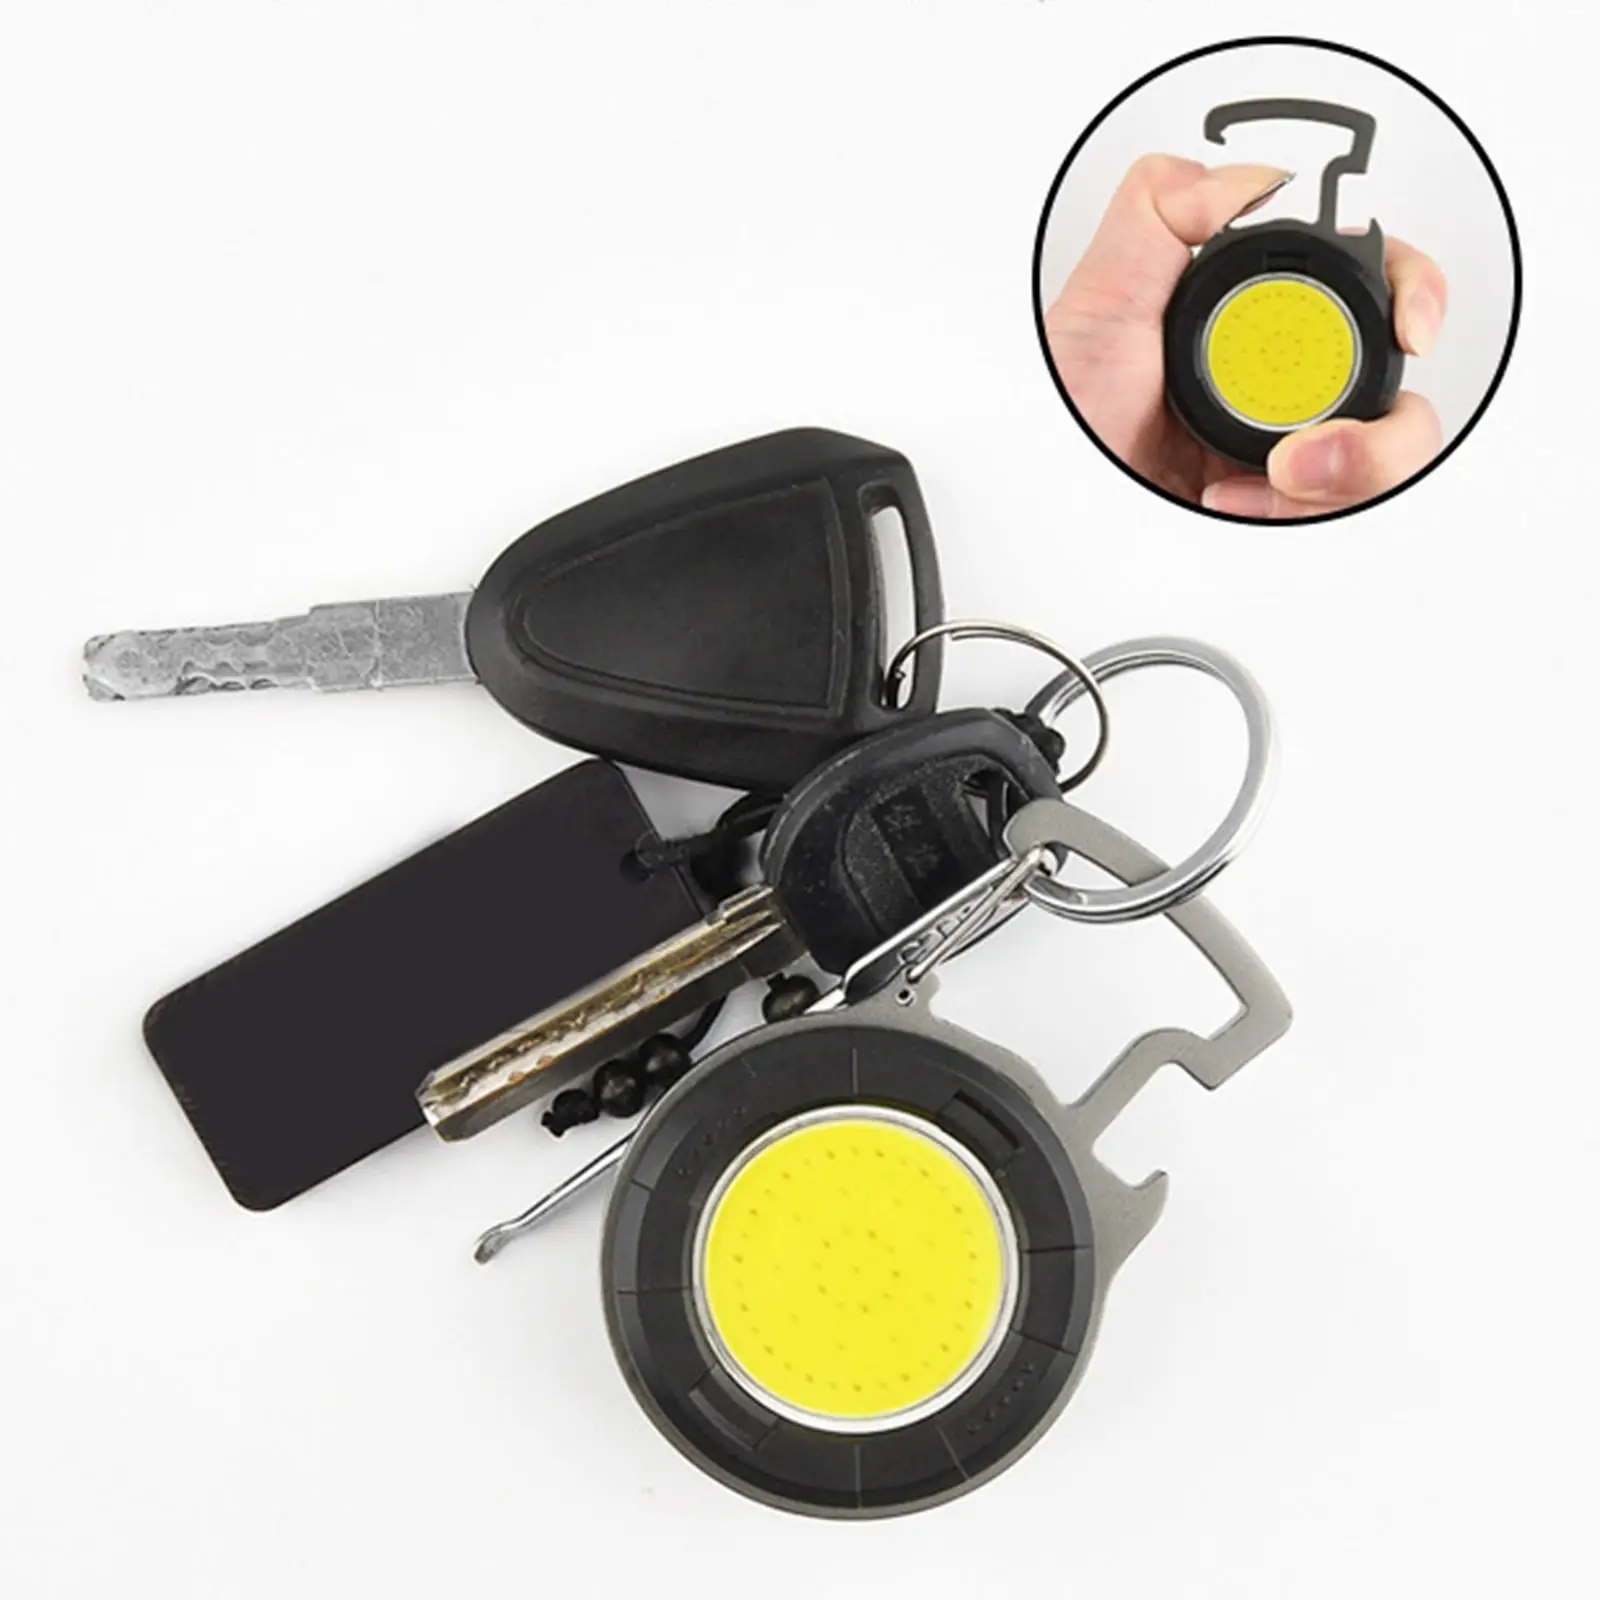 Compact COB flashlights LED Keychain Torch 500 Lumens USB Rechargeable Pocket Light for Walking Daily Use Fishing Emergency